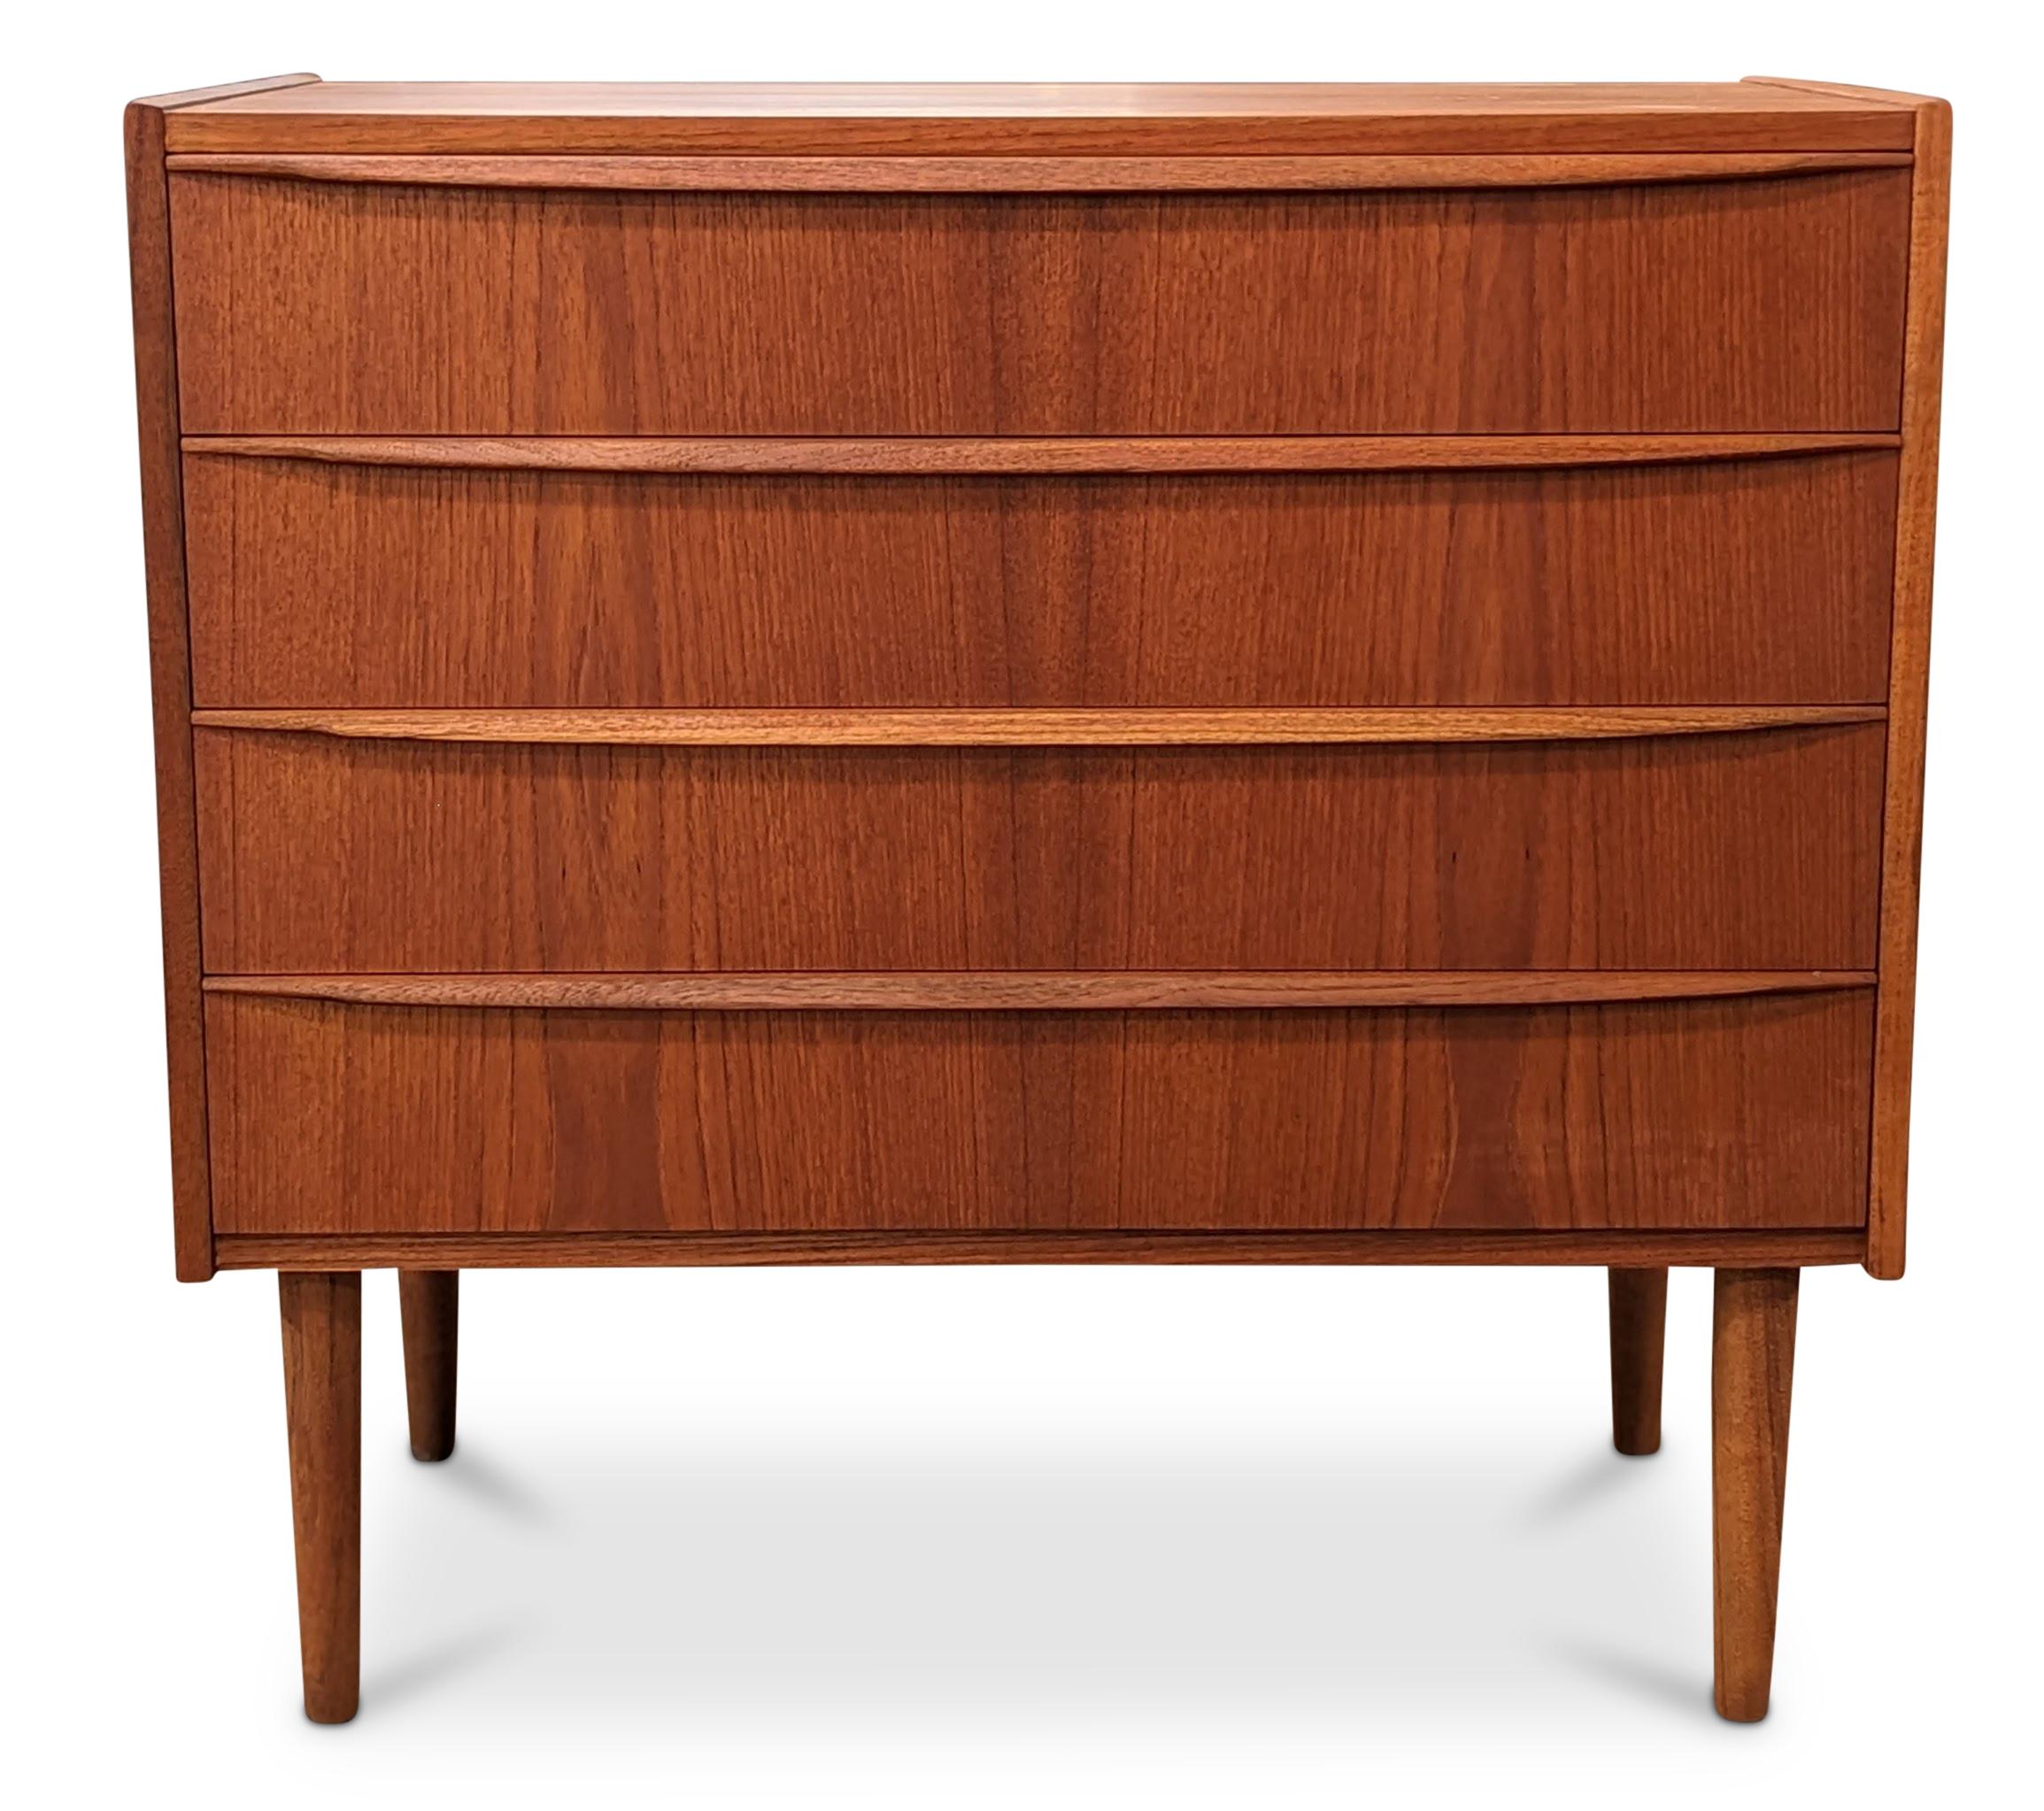 Vintage Danish mid-century modern, made in the 1950's - Recently refurbished

These pieces are more than 65+ years old and some wear and tear can be expected, but we do everything we can to refurbish them in respect to the design.

There is a